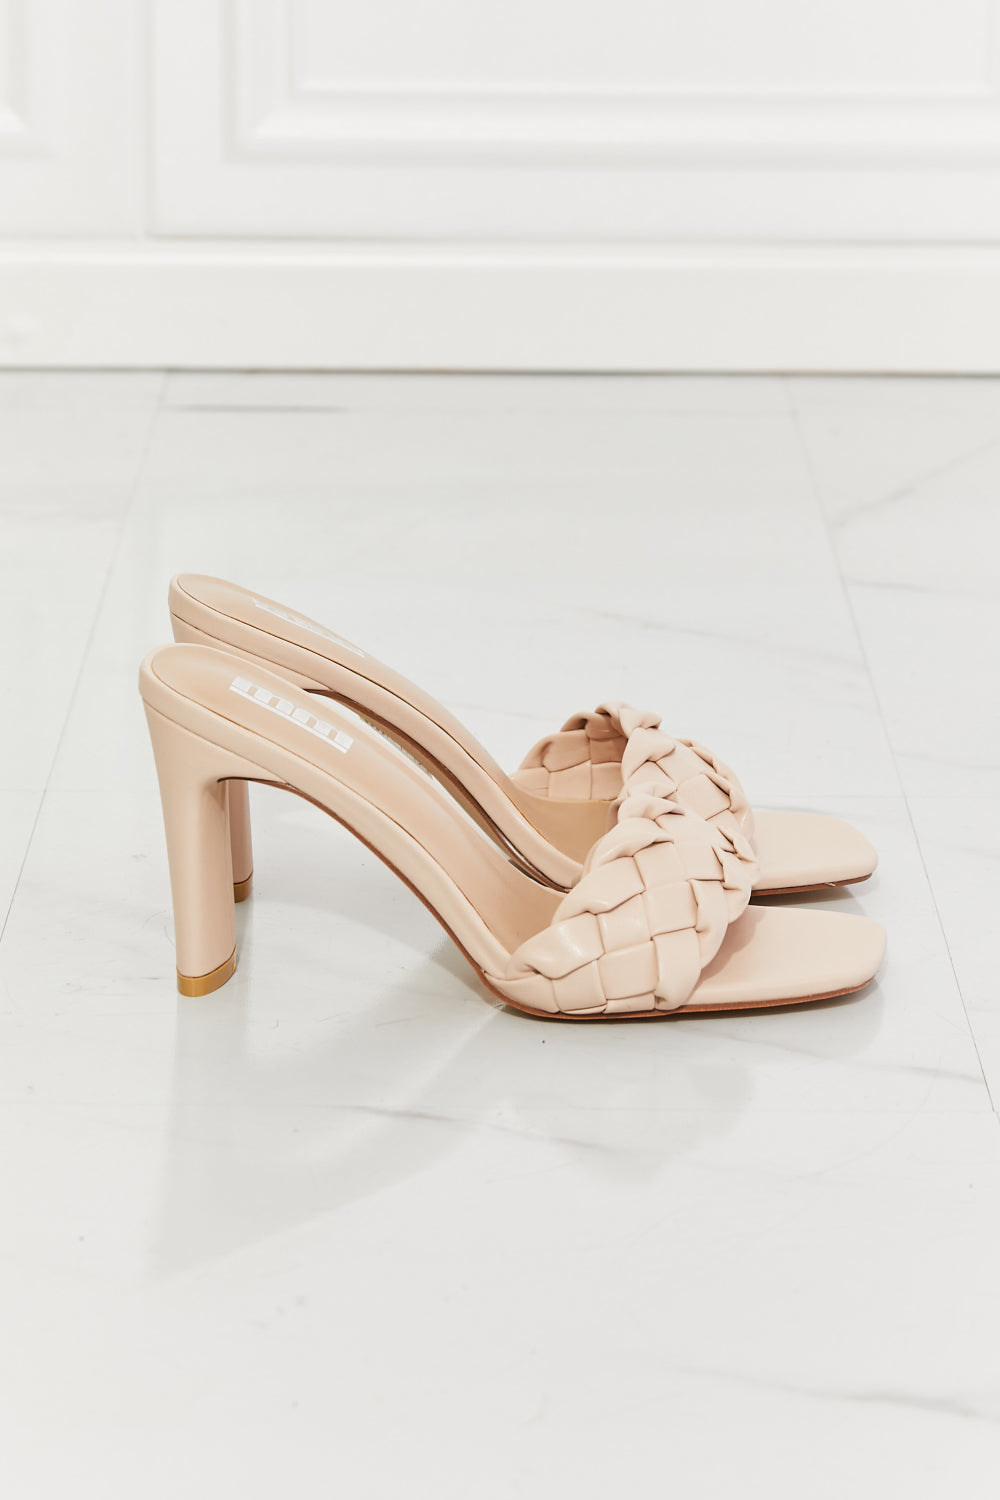 MMShoes Top of the World Braided Block Heel Sandals in Beige Print on any thing USA/STOD clothes